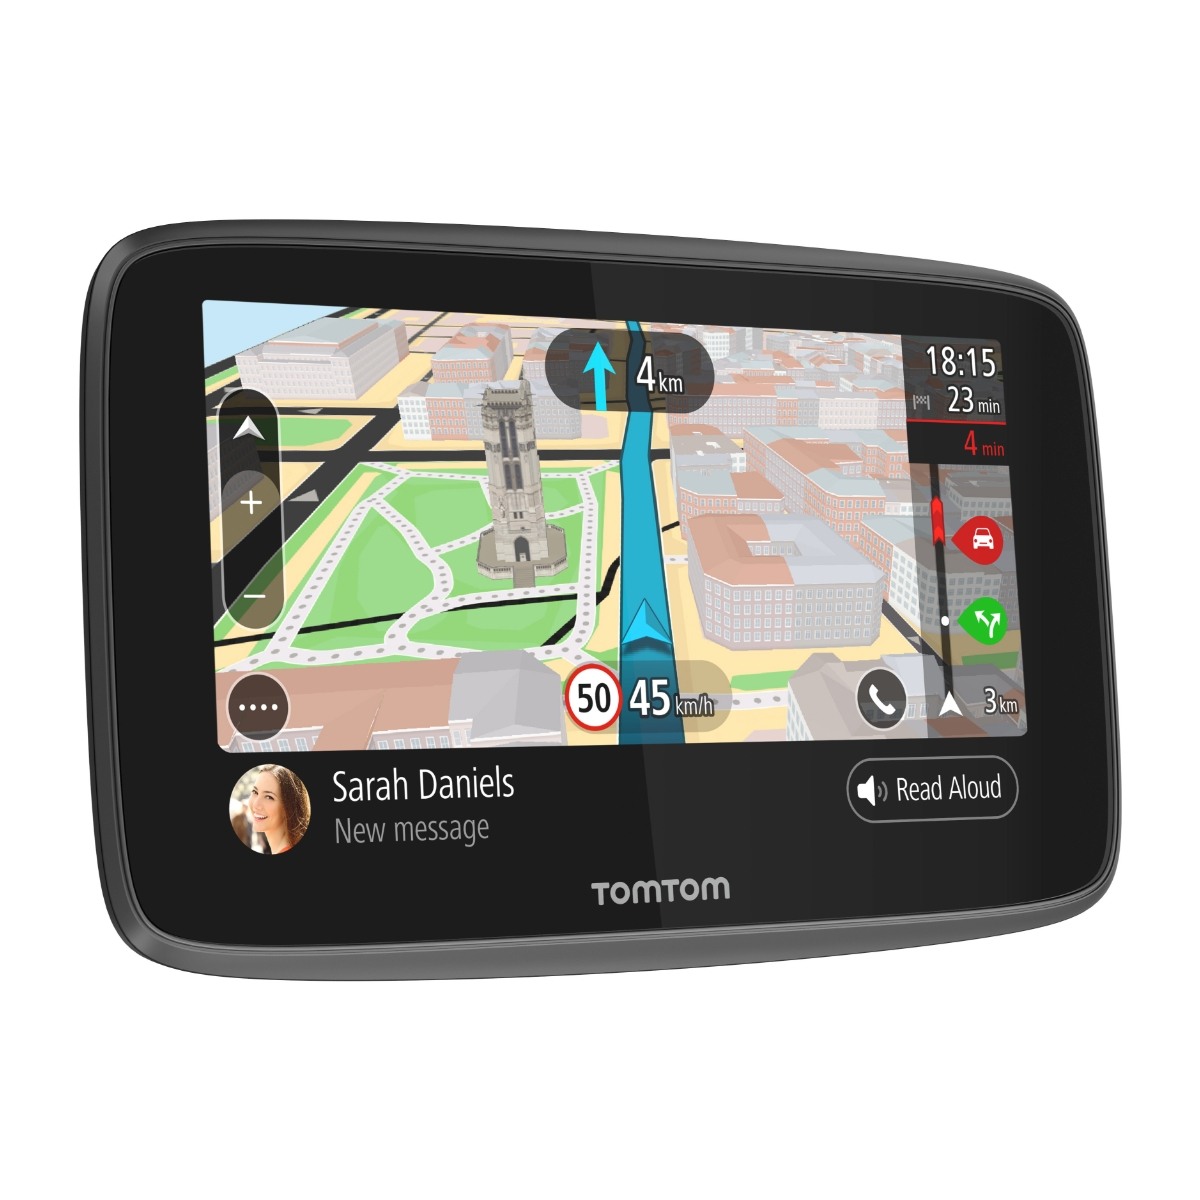 tomtom home saying no device connected